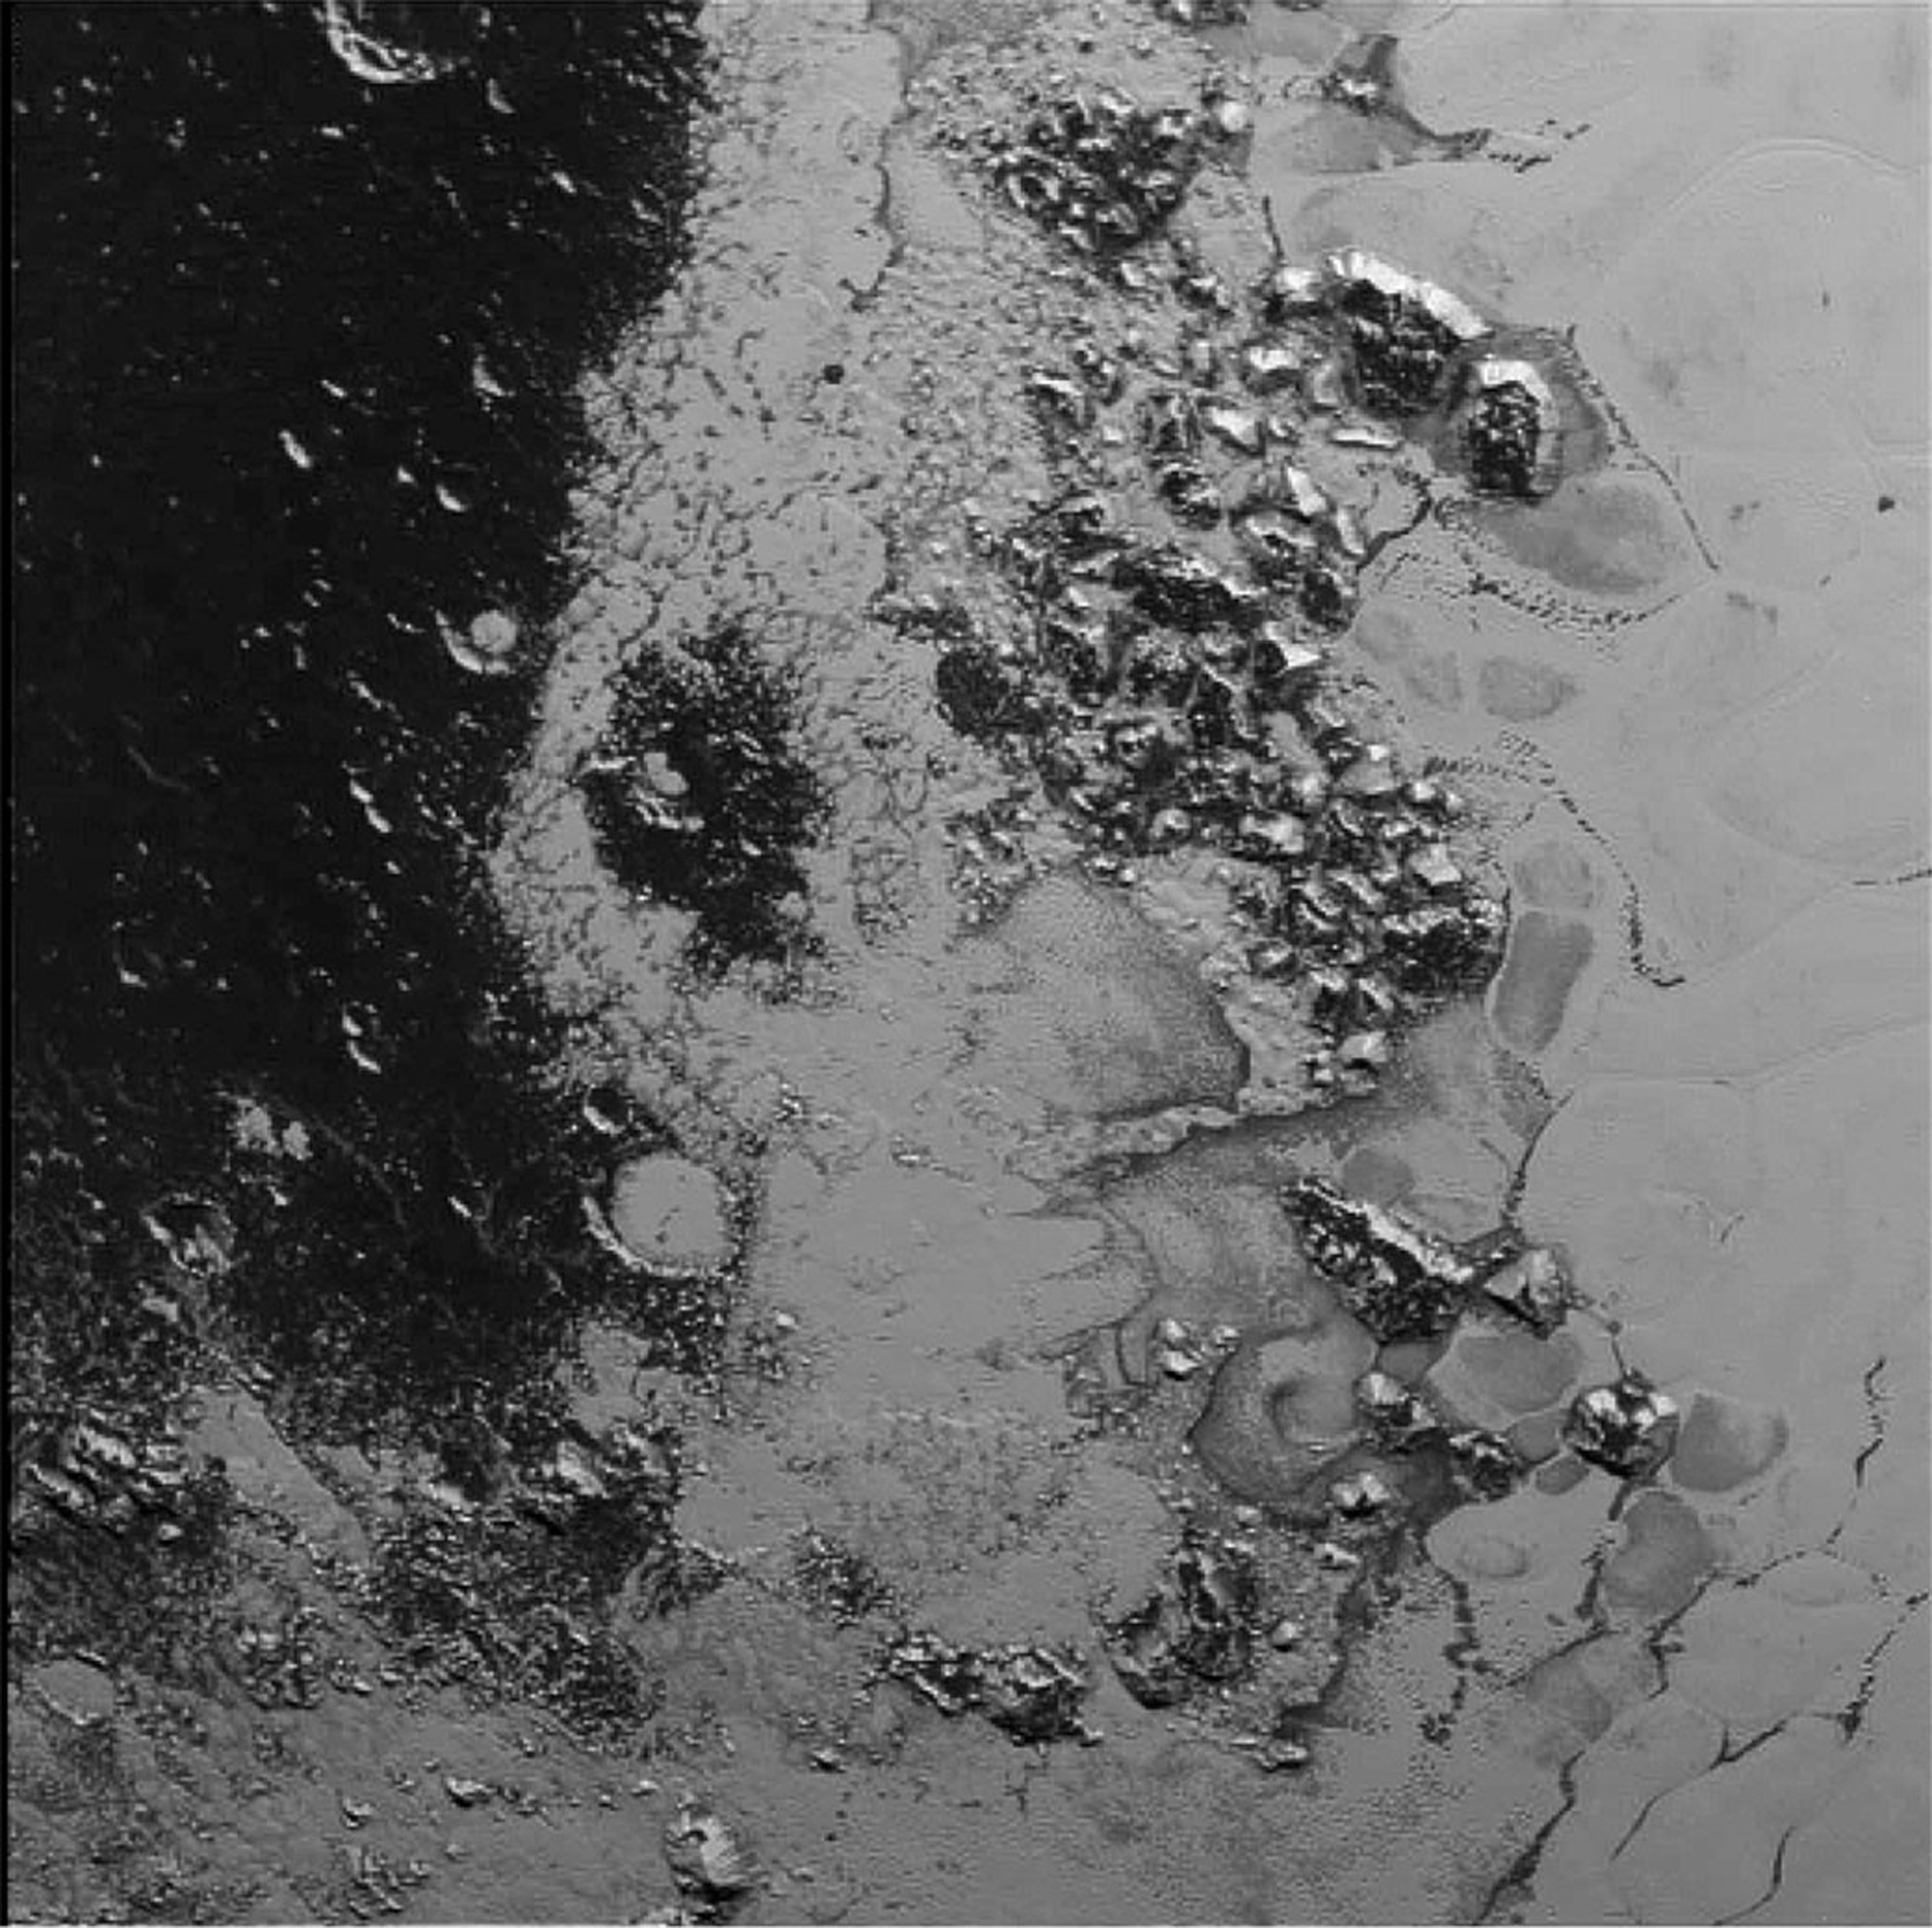 This photo shows the new mountain range discovered by NASA’s New Horizons spacecraft on July 14, 2015 on Pluto, in a heart-shaped region named Tombaugh Regio.